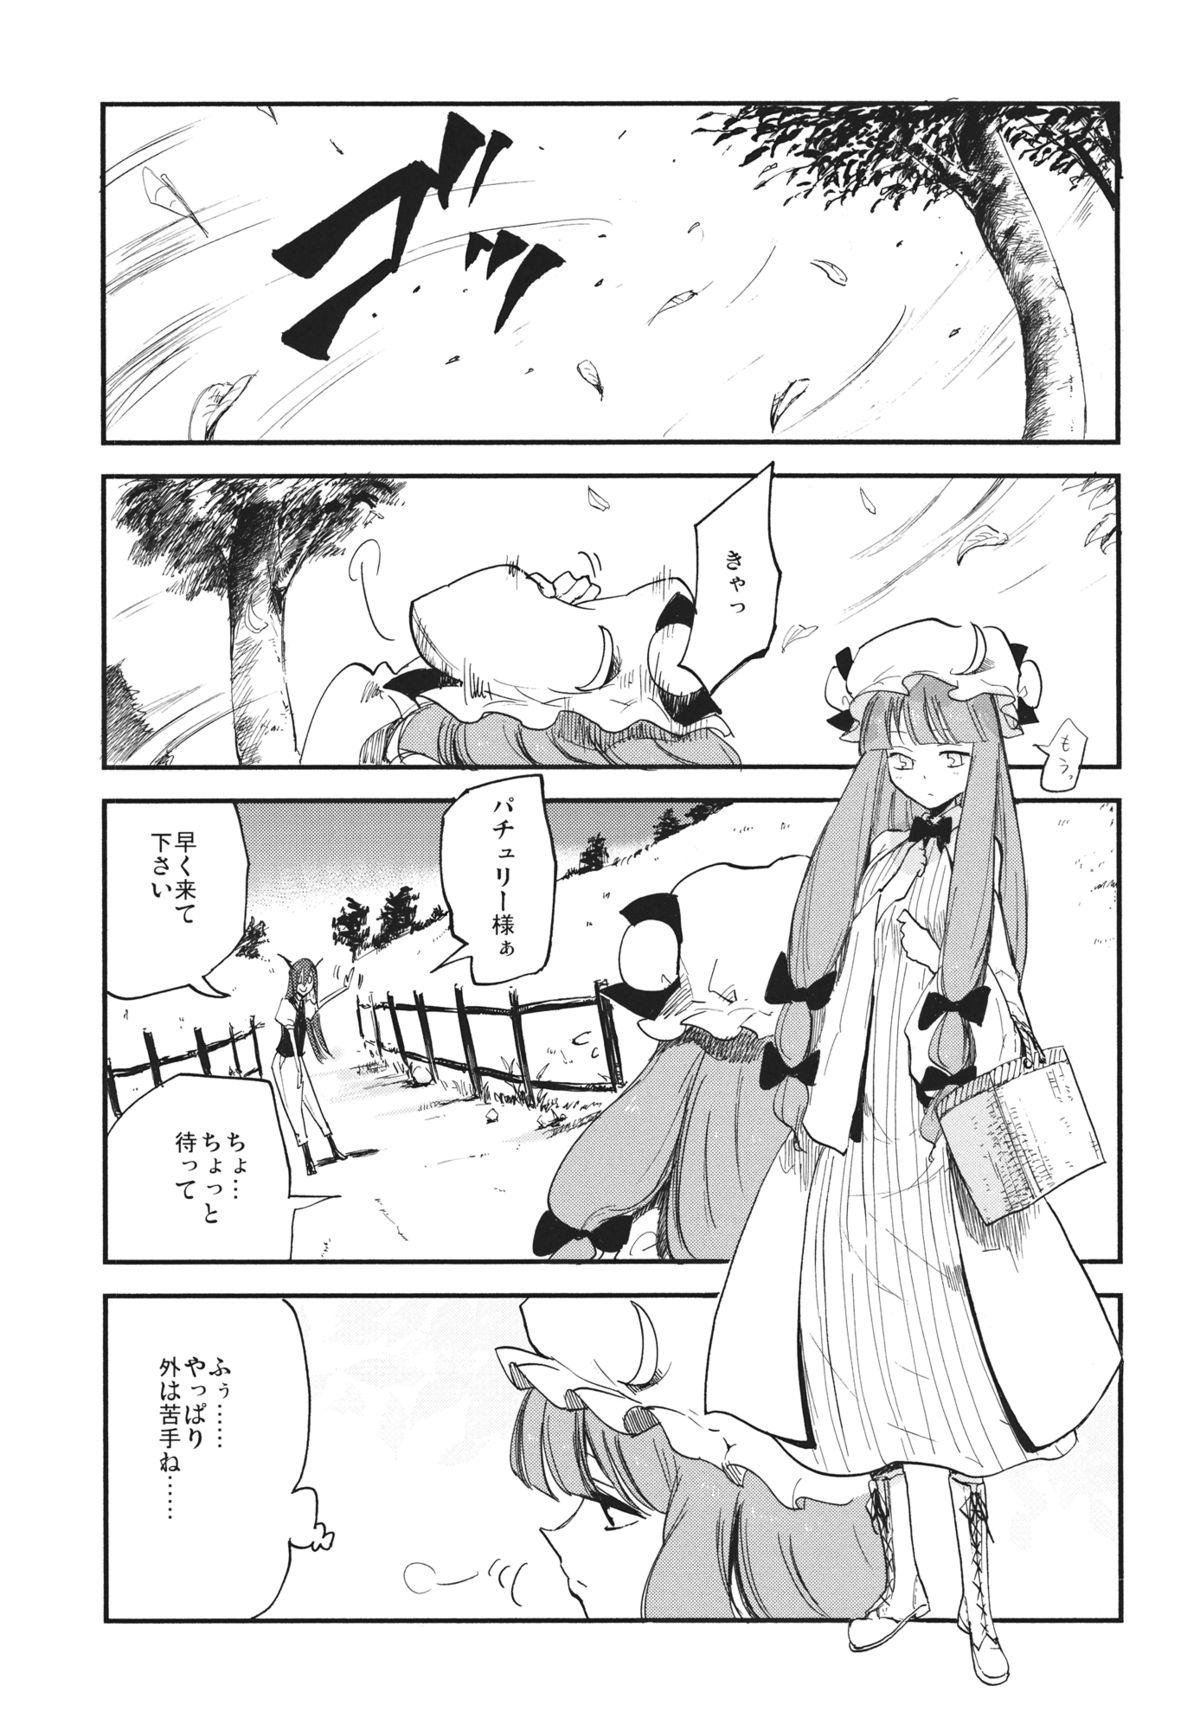 Letsdoeit Donten Library - Touhou project Shemale Sex - Page 8